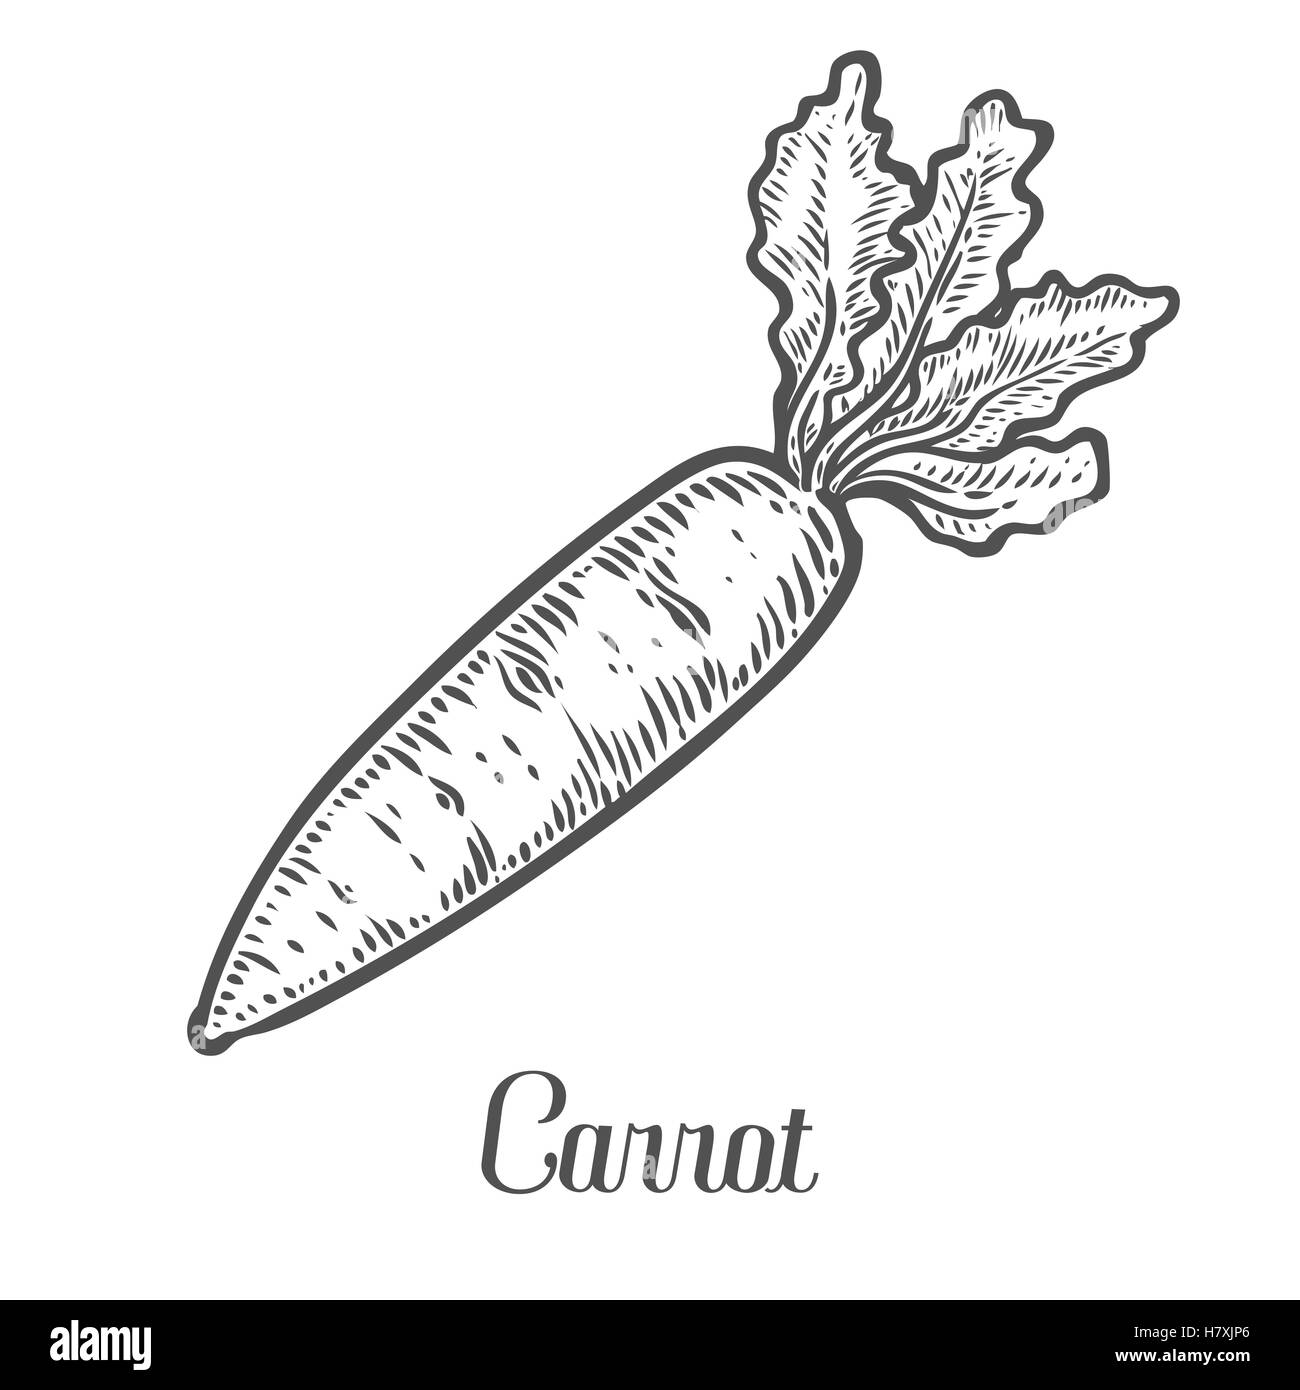 Carrot vector. Isolated on white background. Carrot food ingredient. Engraved hand drawn illustration in retro vintage style. Or Stock Vector